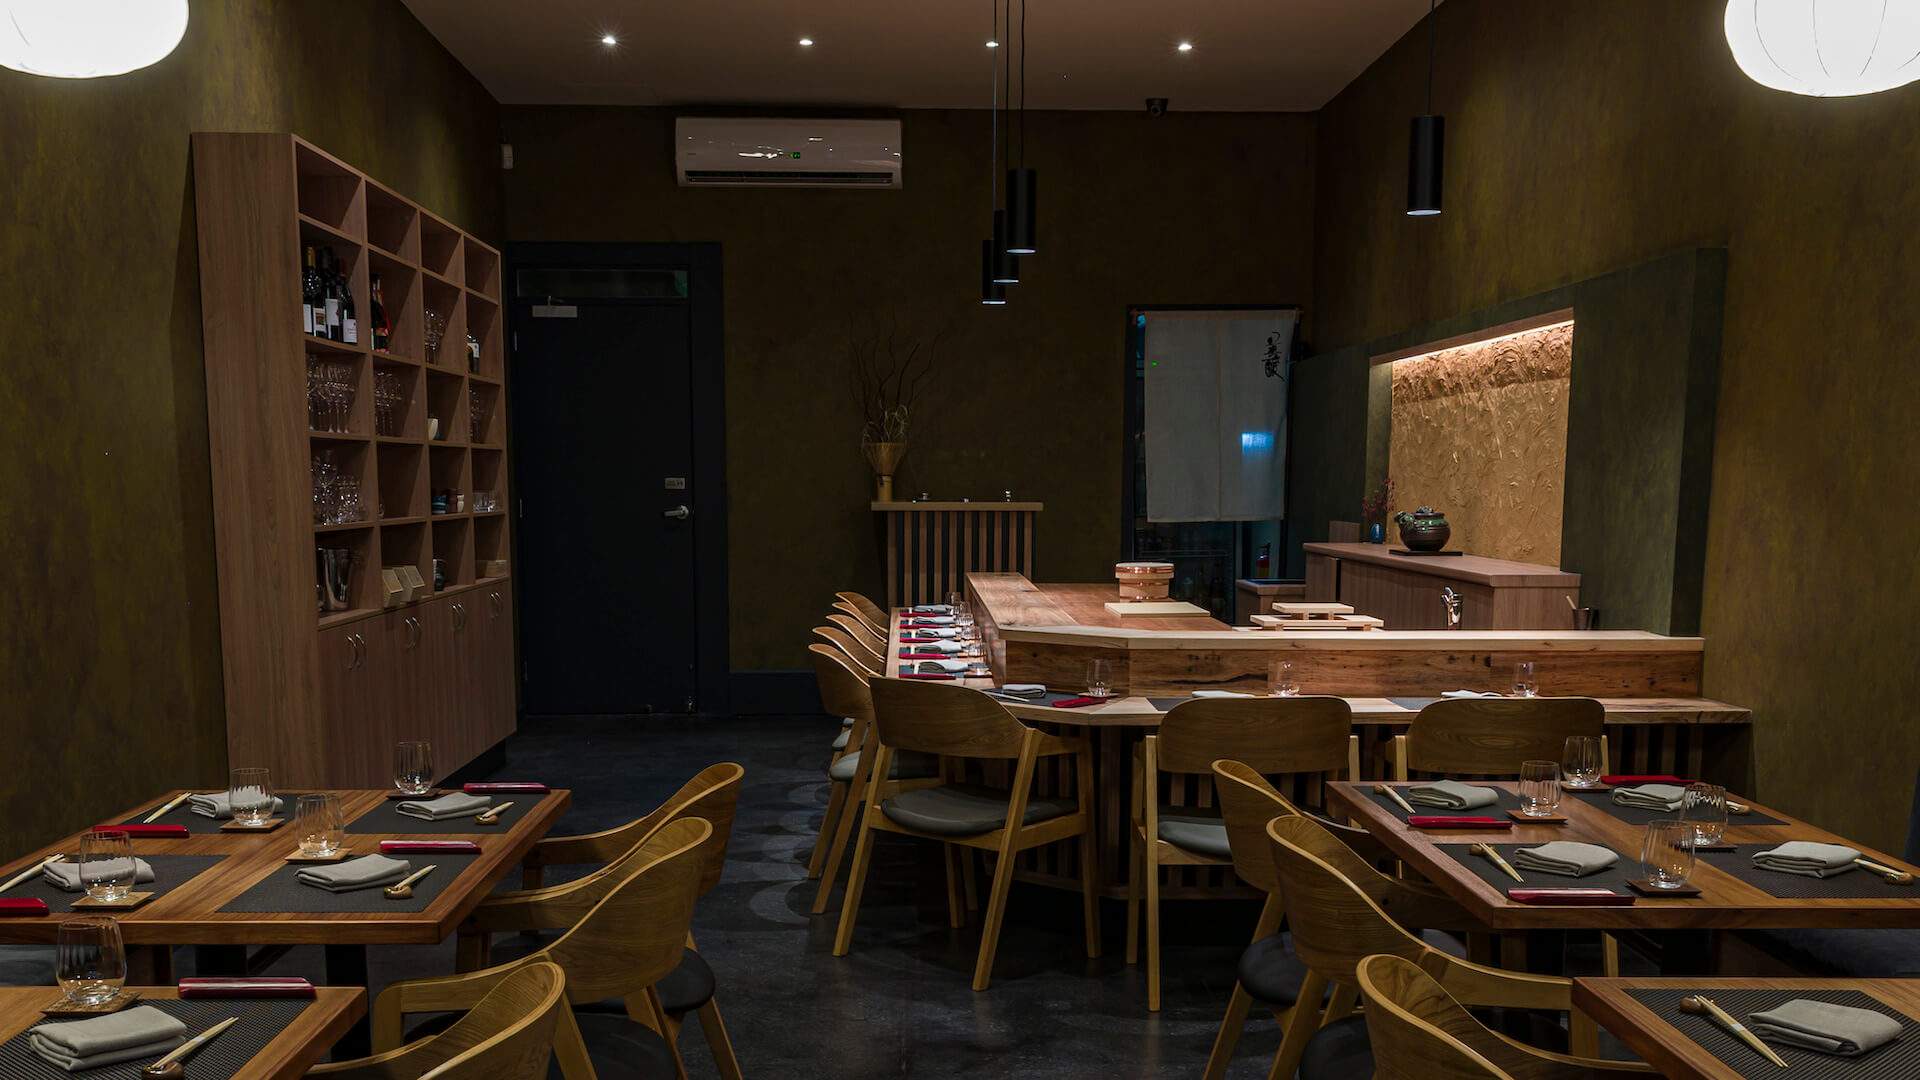 Now Open: Shusai Mijo Brings Sophisticated Omakase to Fitzroy's Less-Than-Formal Johnston Street